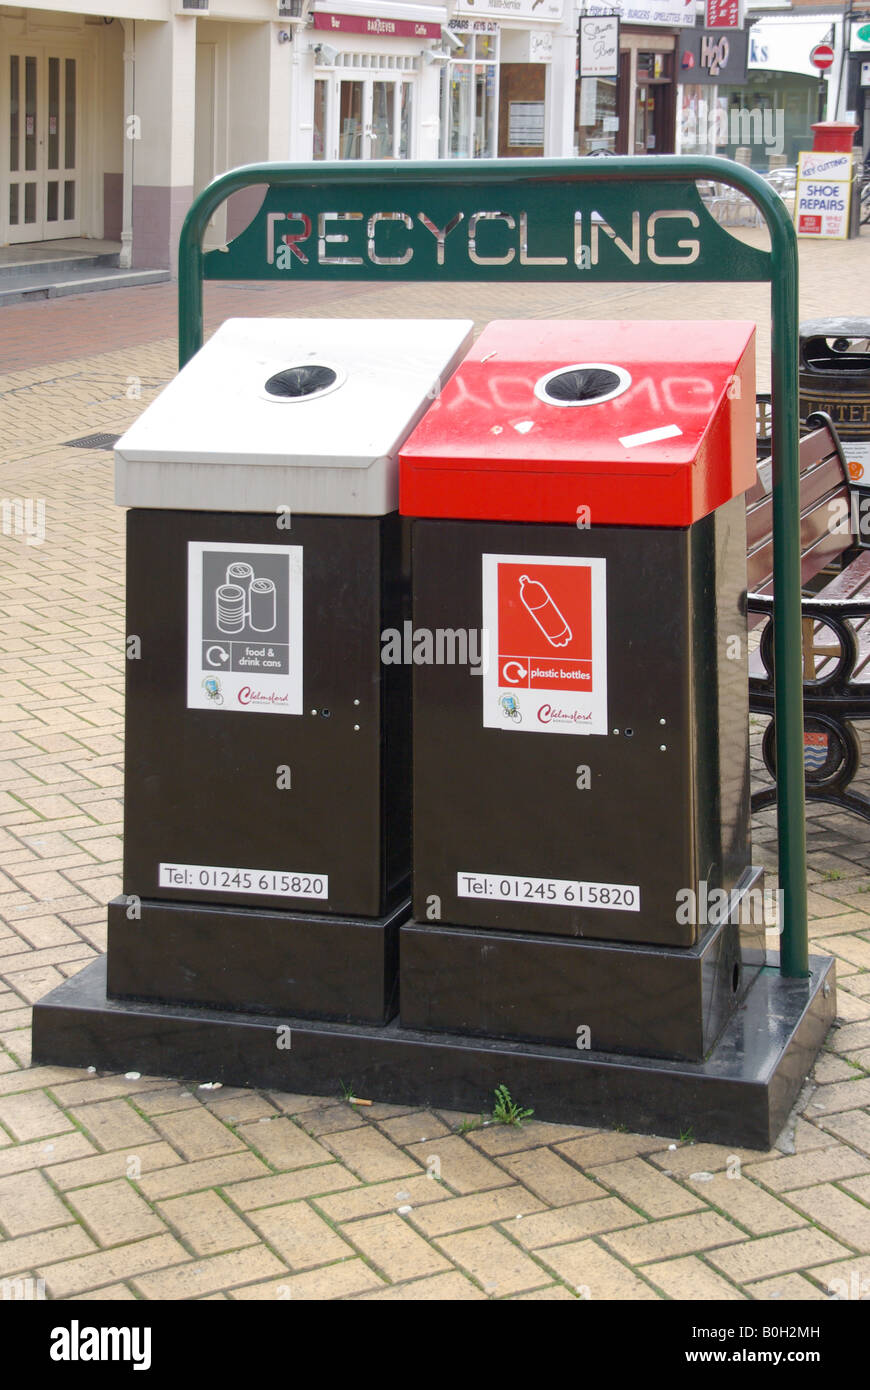 Litter bins for cans and plastic bottles located in pedestrianised shopping high street Stock Photo